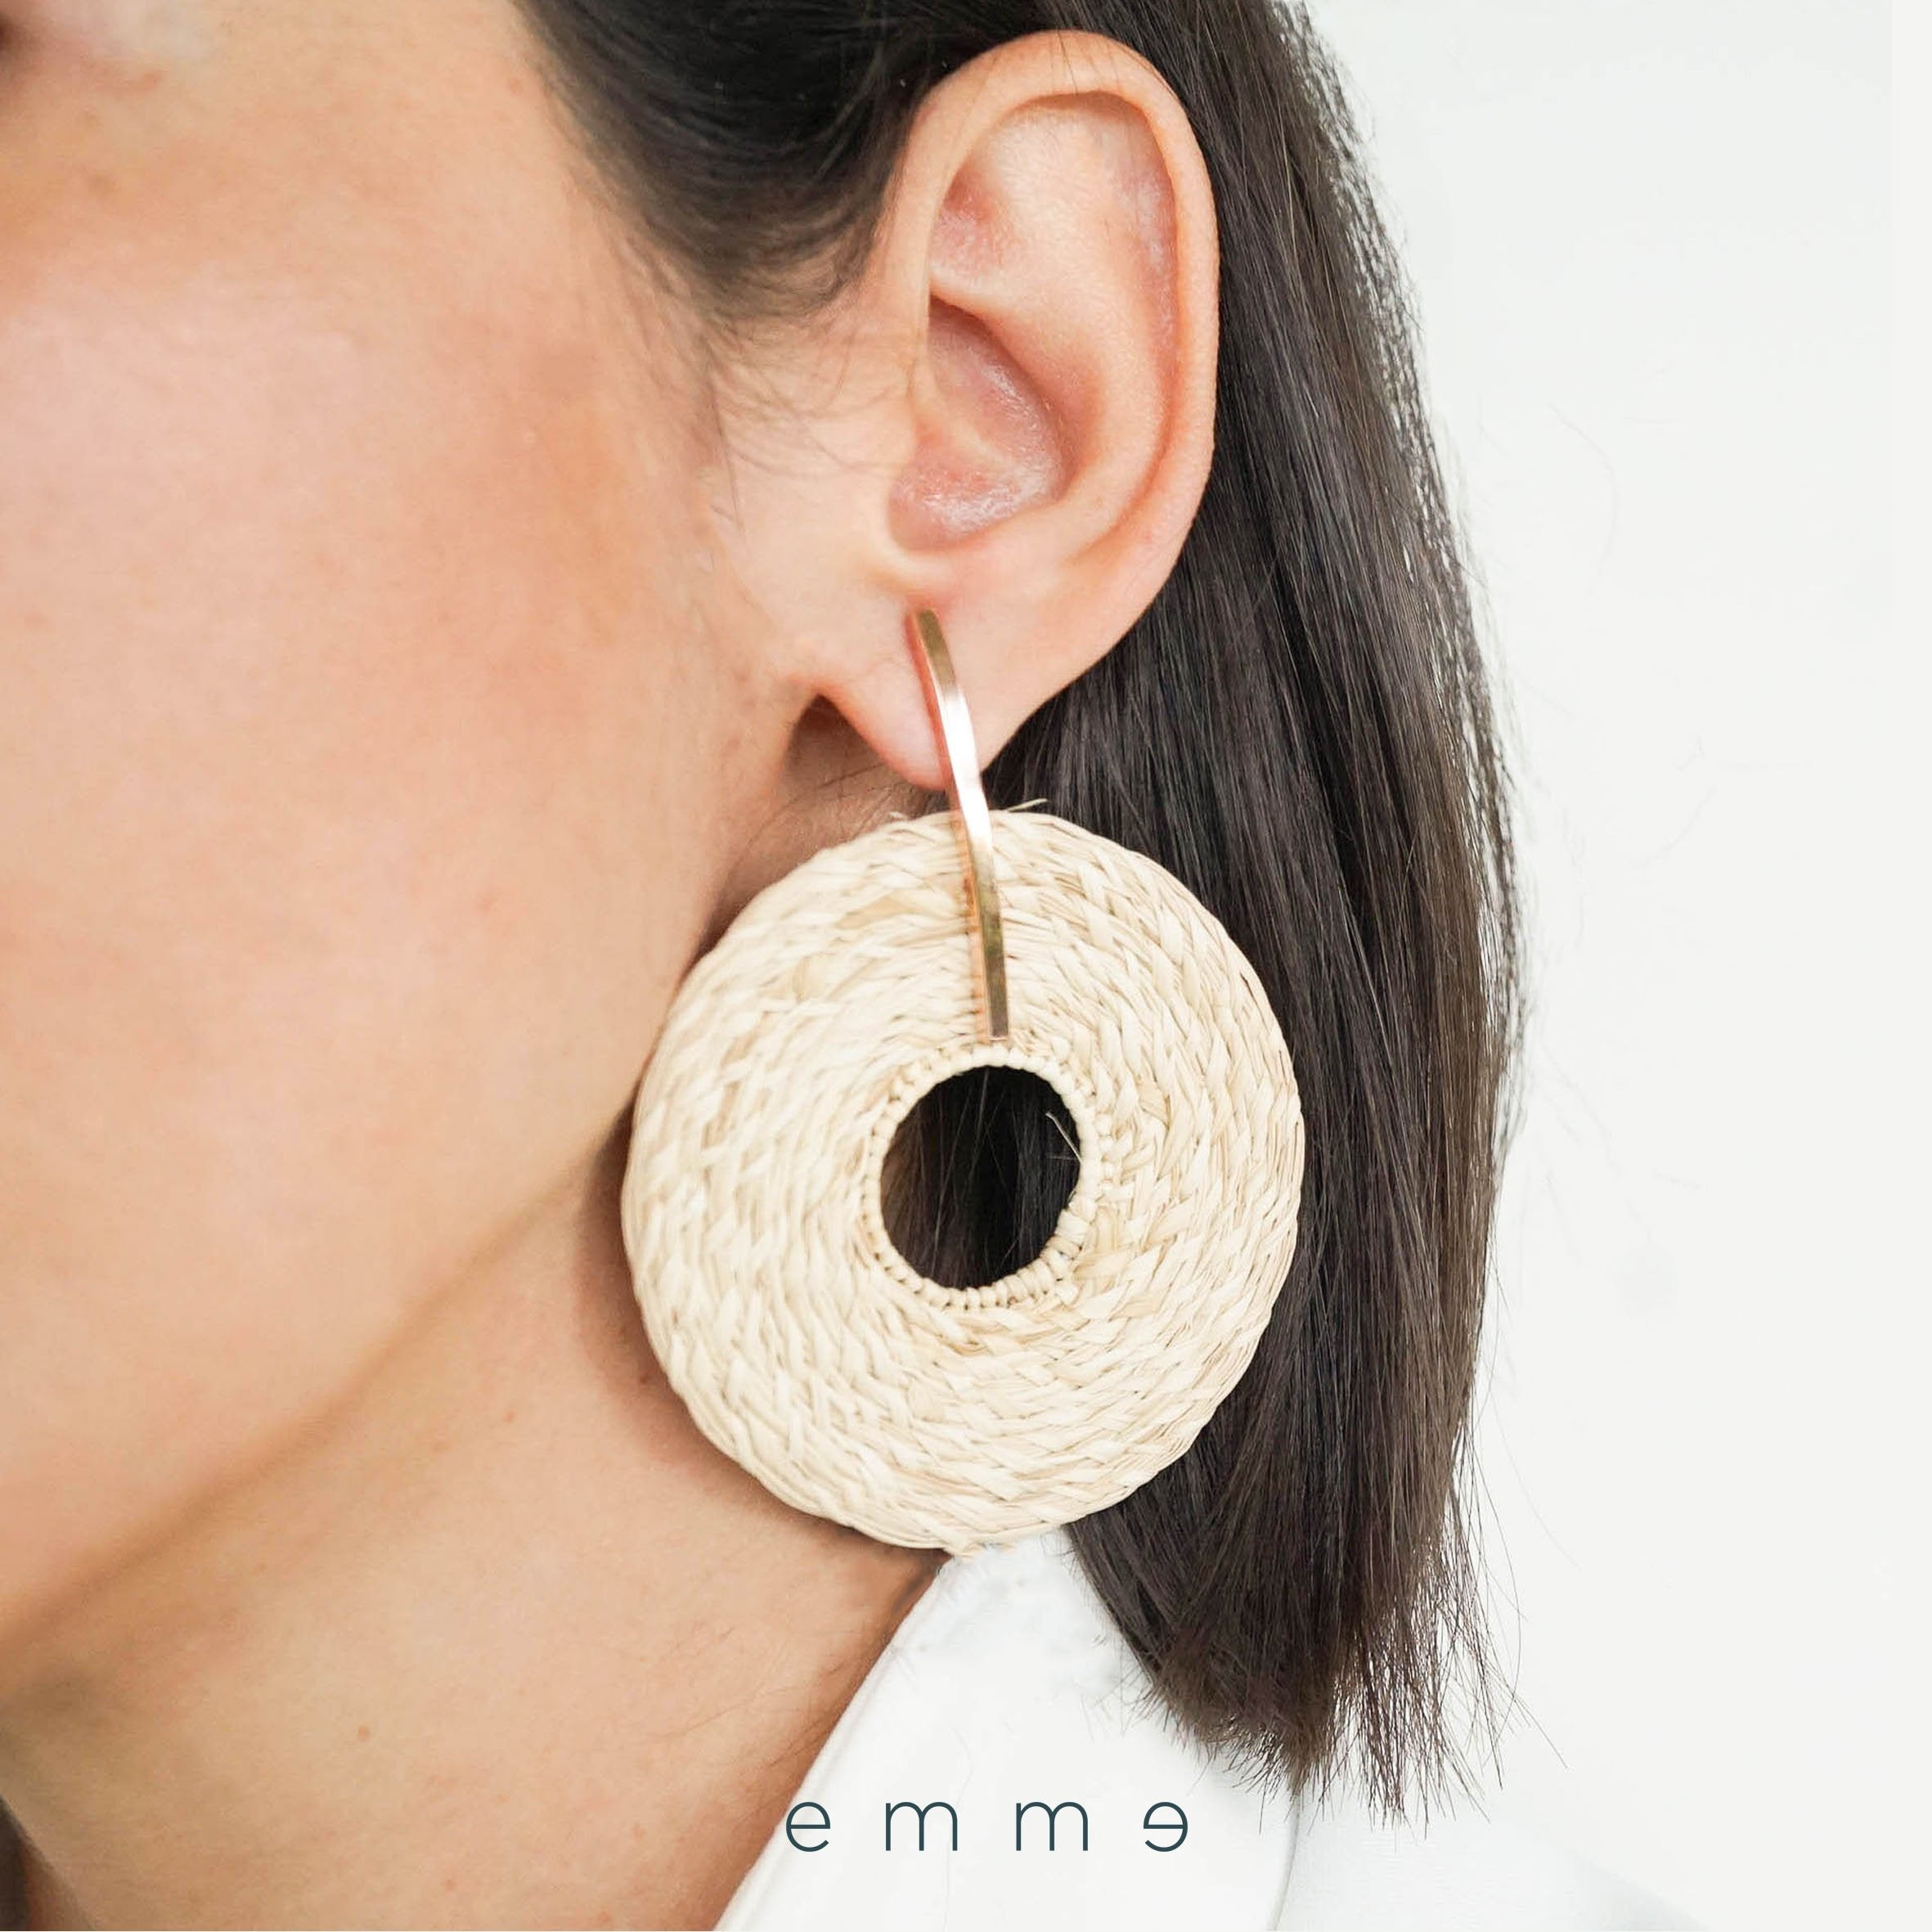 Tócate Round Statement Earrings in Rose Gold - emme